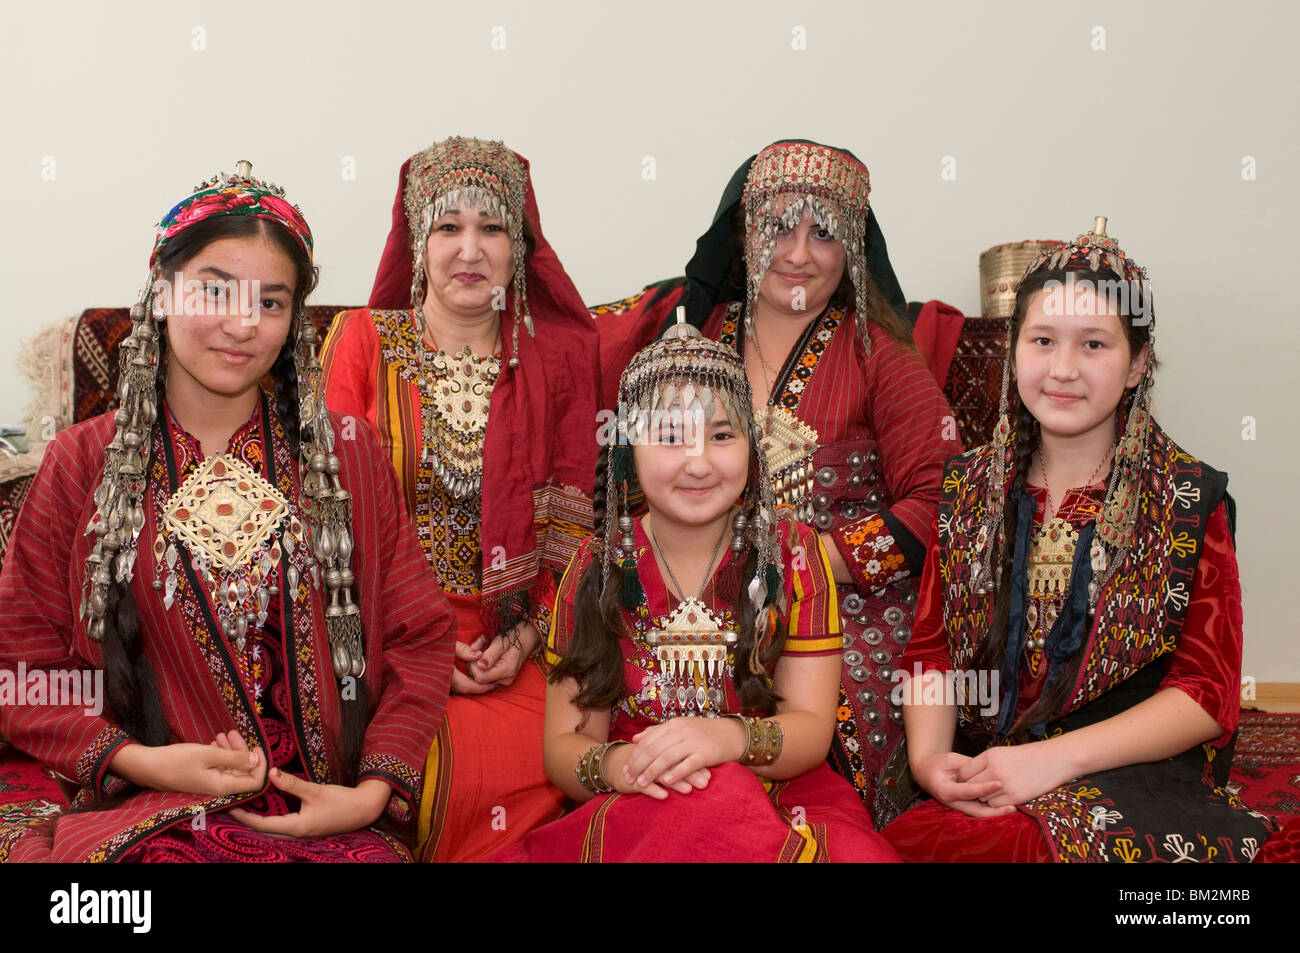 Group picture of Turkmen family in tradtional costume, Turkmenistan Stock Photo